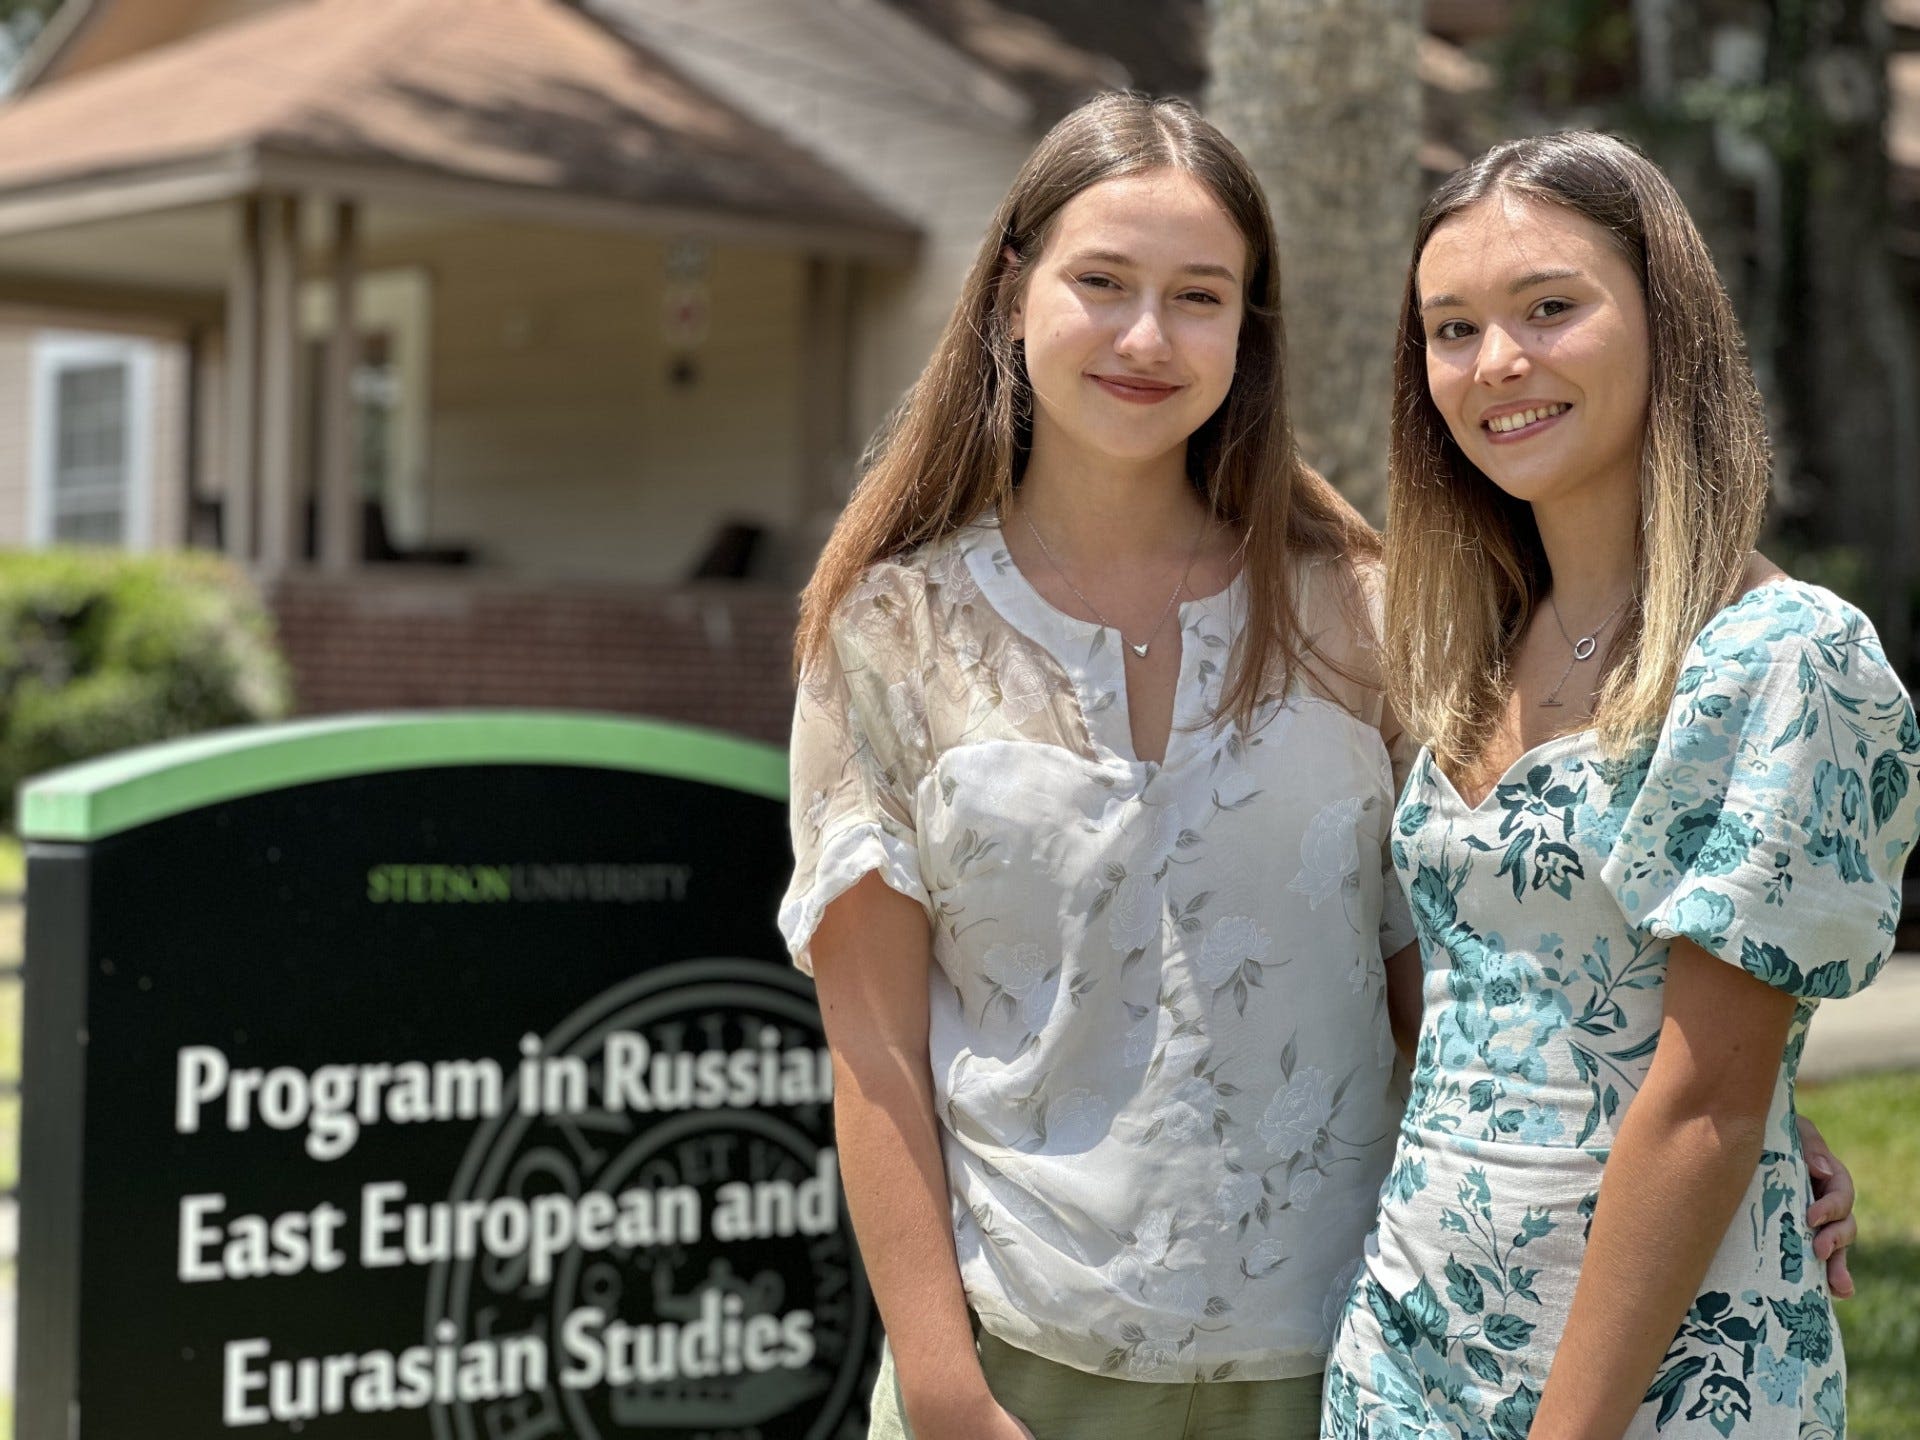 Two Ukrainian students graduating from Stetson Saturday grateful for chance to study here